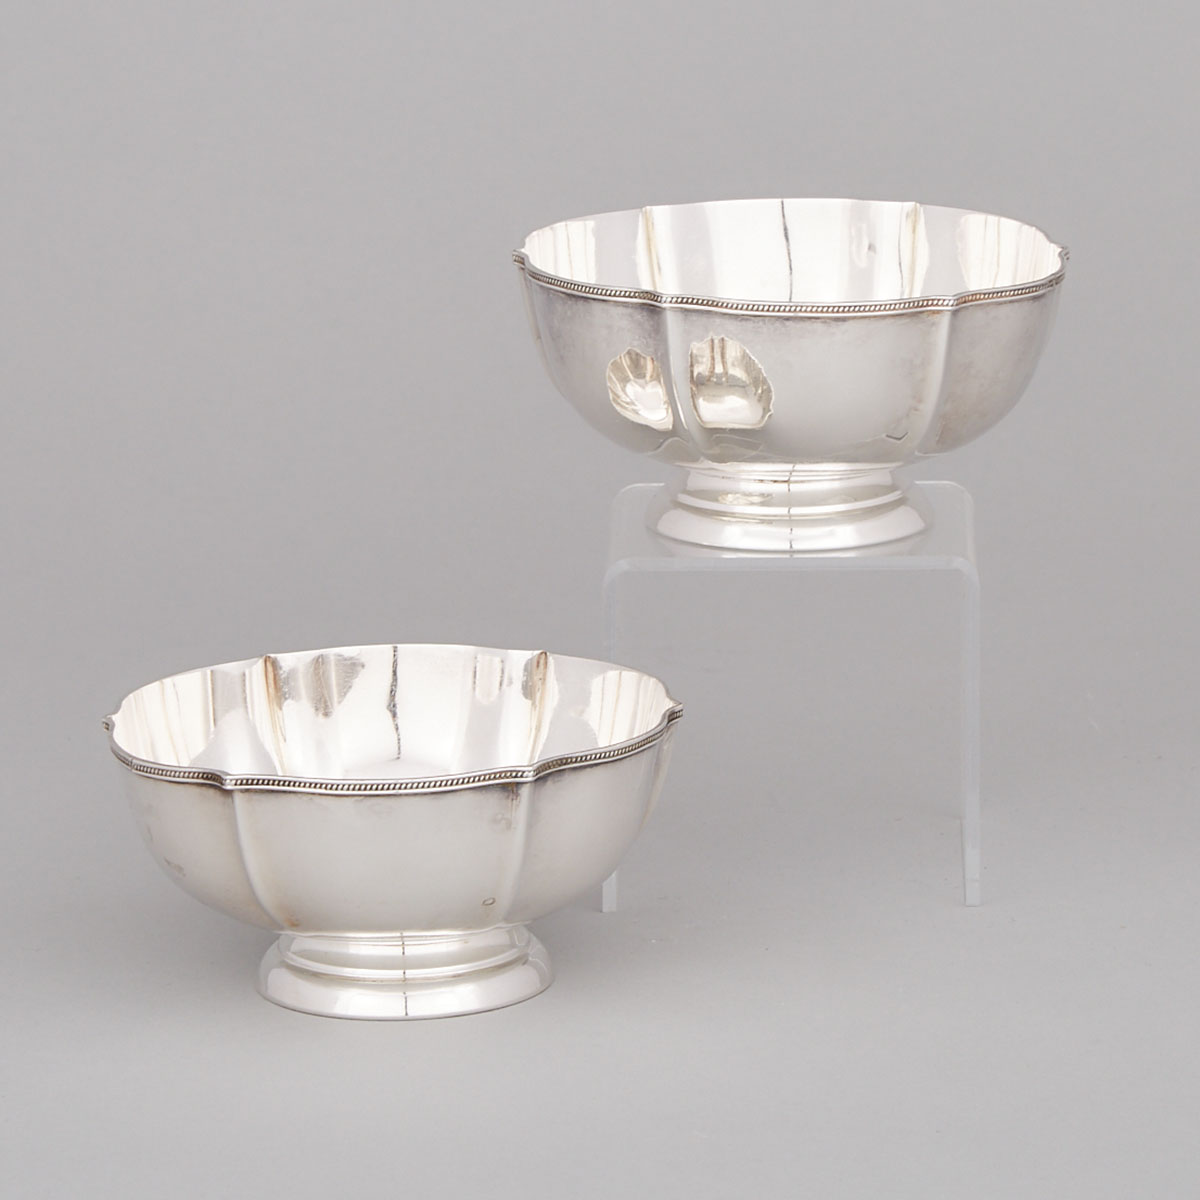 Pair of Canadian Silver Bowls, 20th century